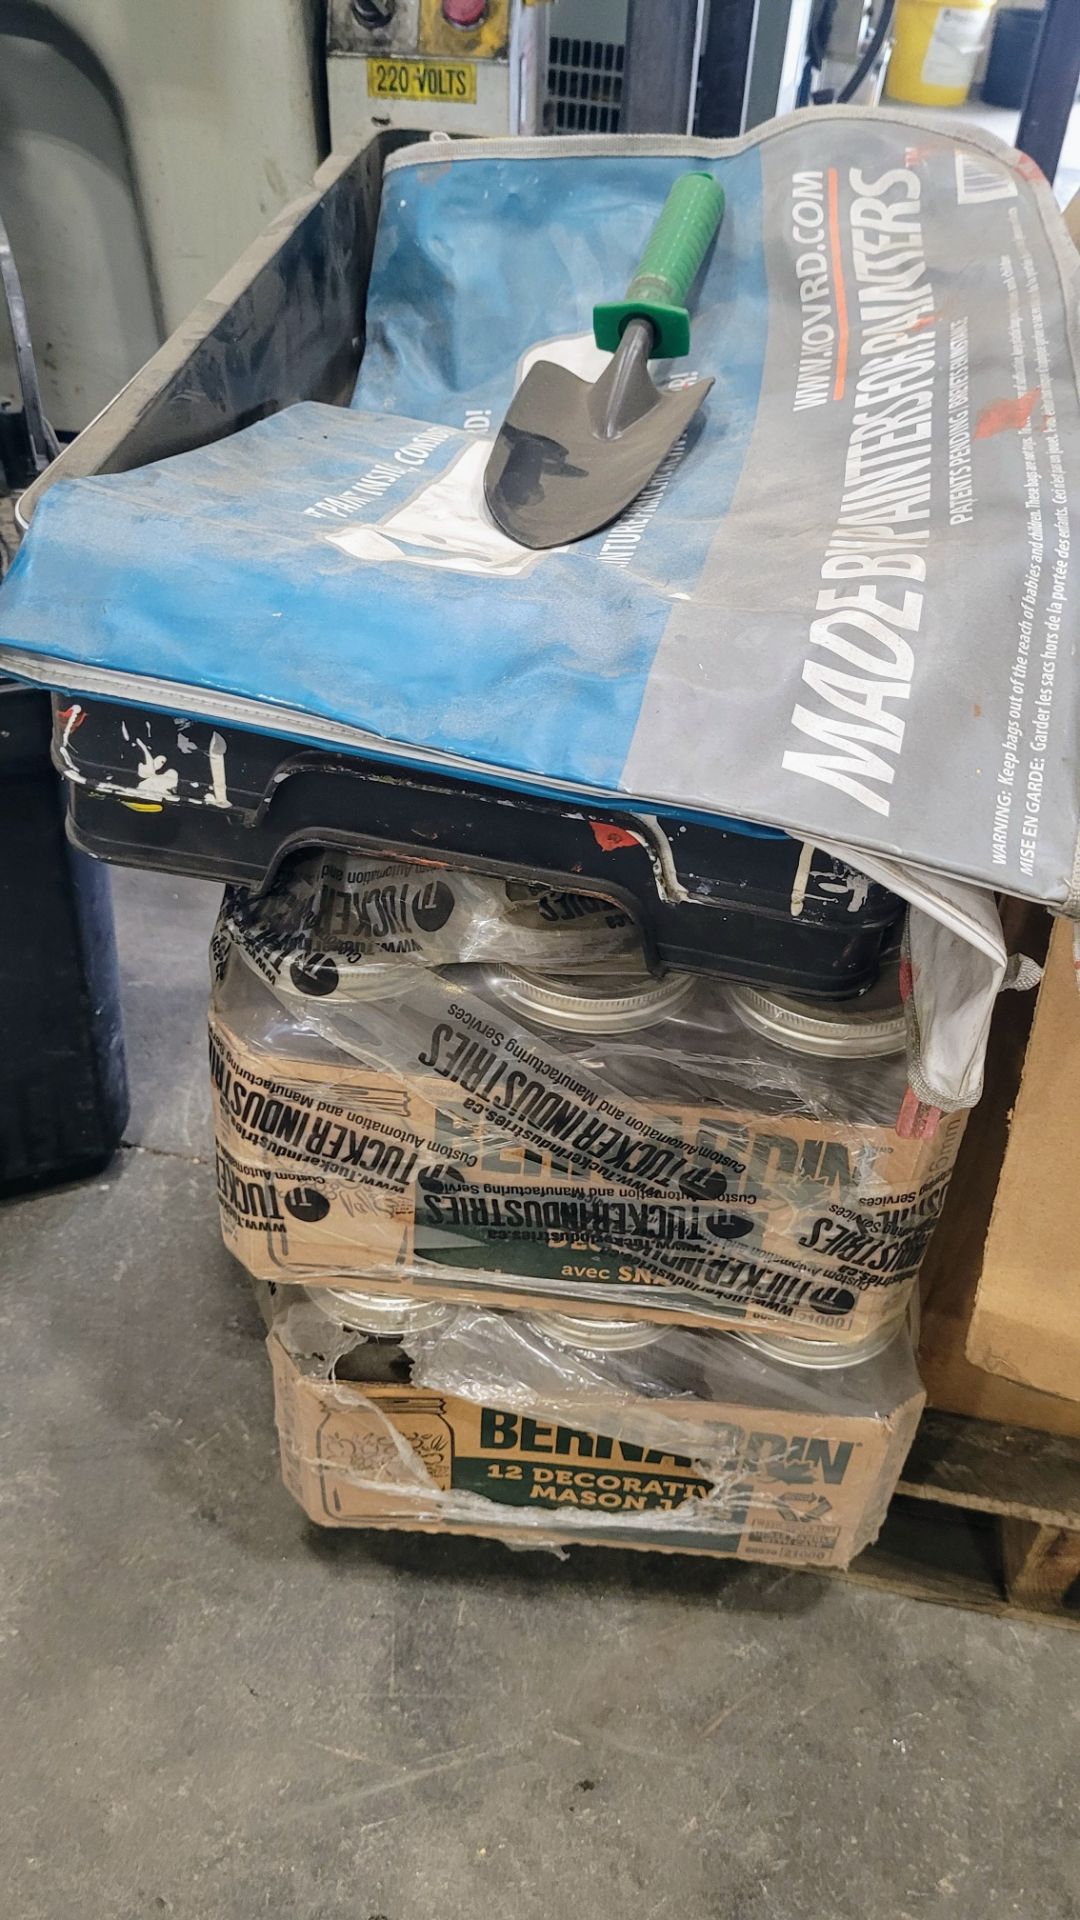 LARGE LOT ASSORTED ELECTRICAL, WIRE, SUMP PUMPS, PAINTING, SUPPLIES, BACK RACK, ETC - Image 12 of 14